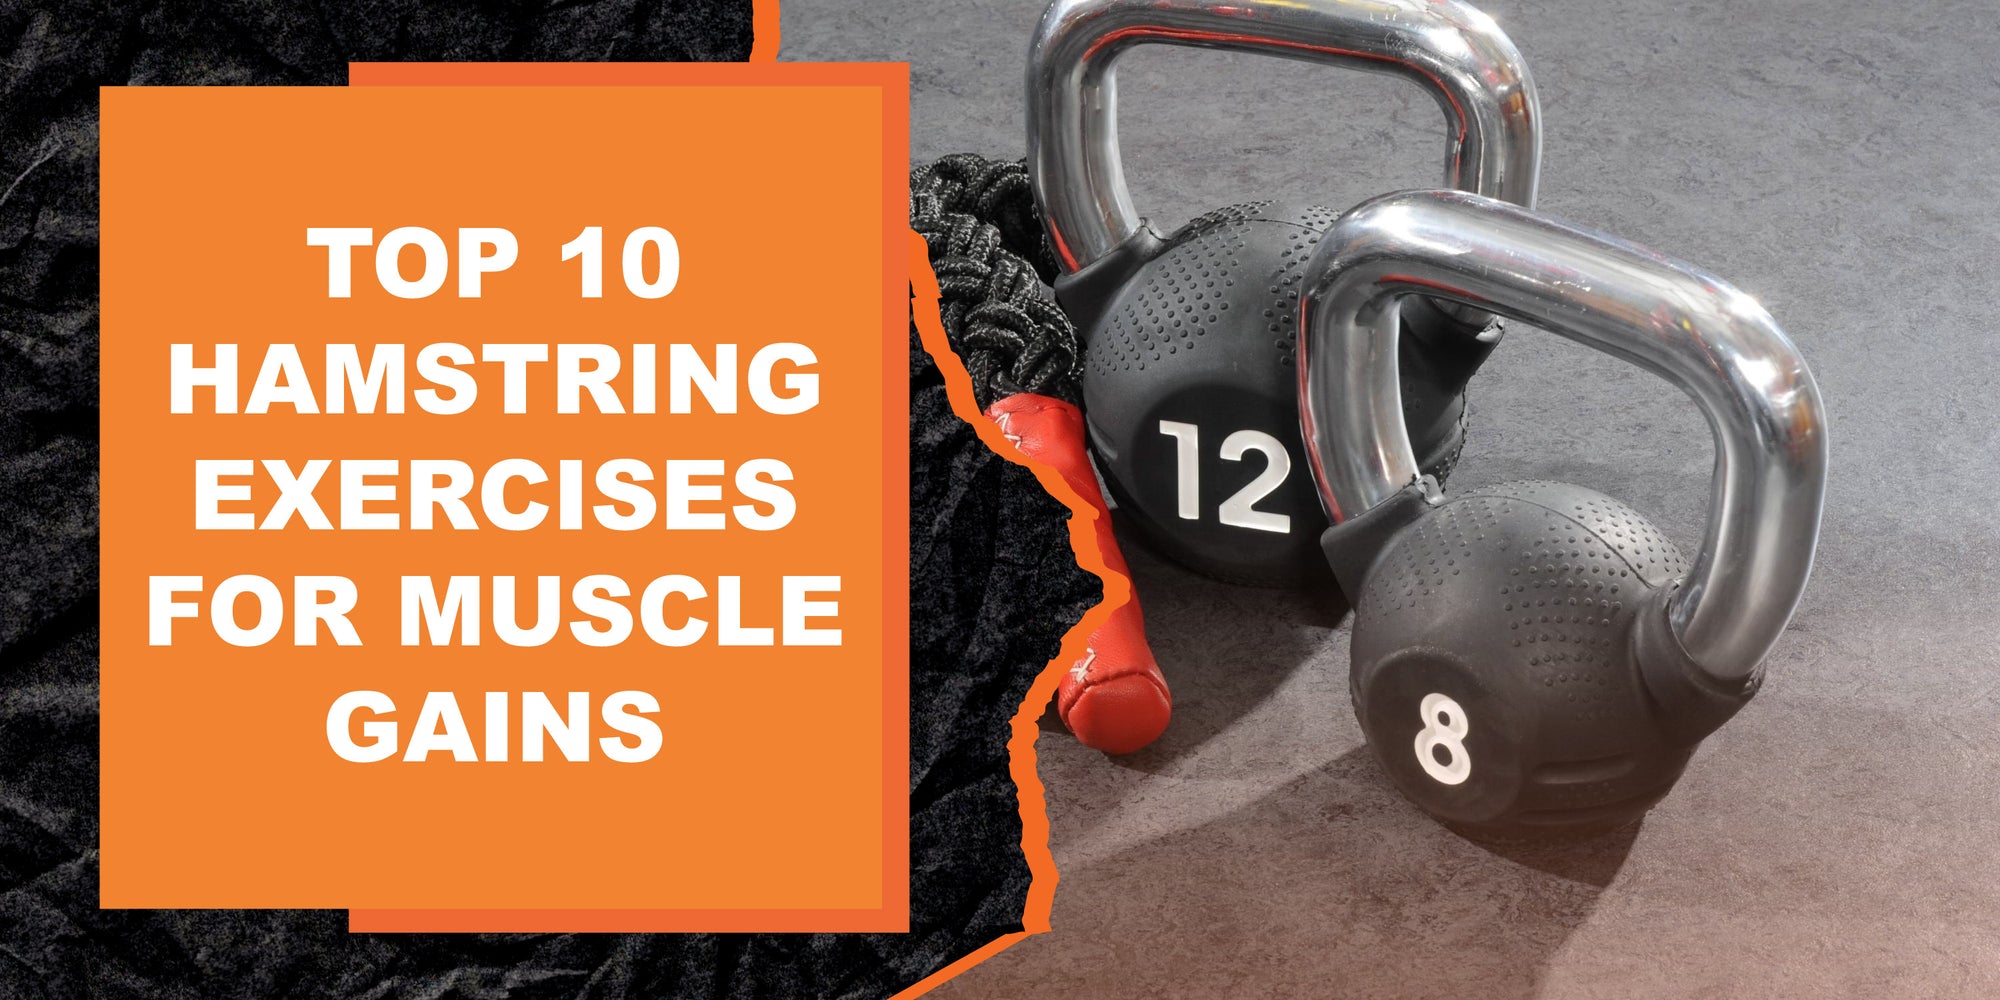 Top 10 Hamstring Exercises for Muscle Gains